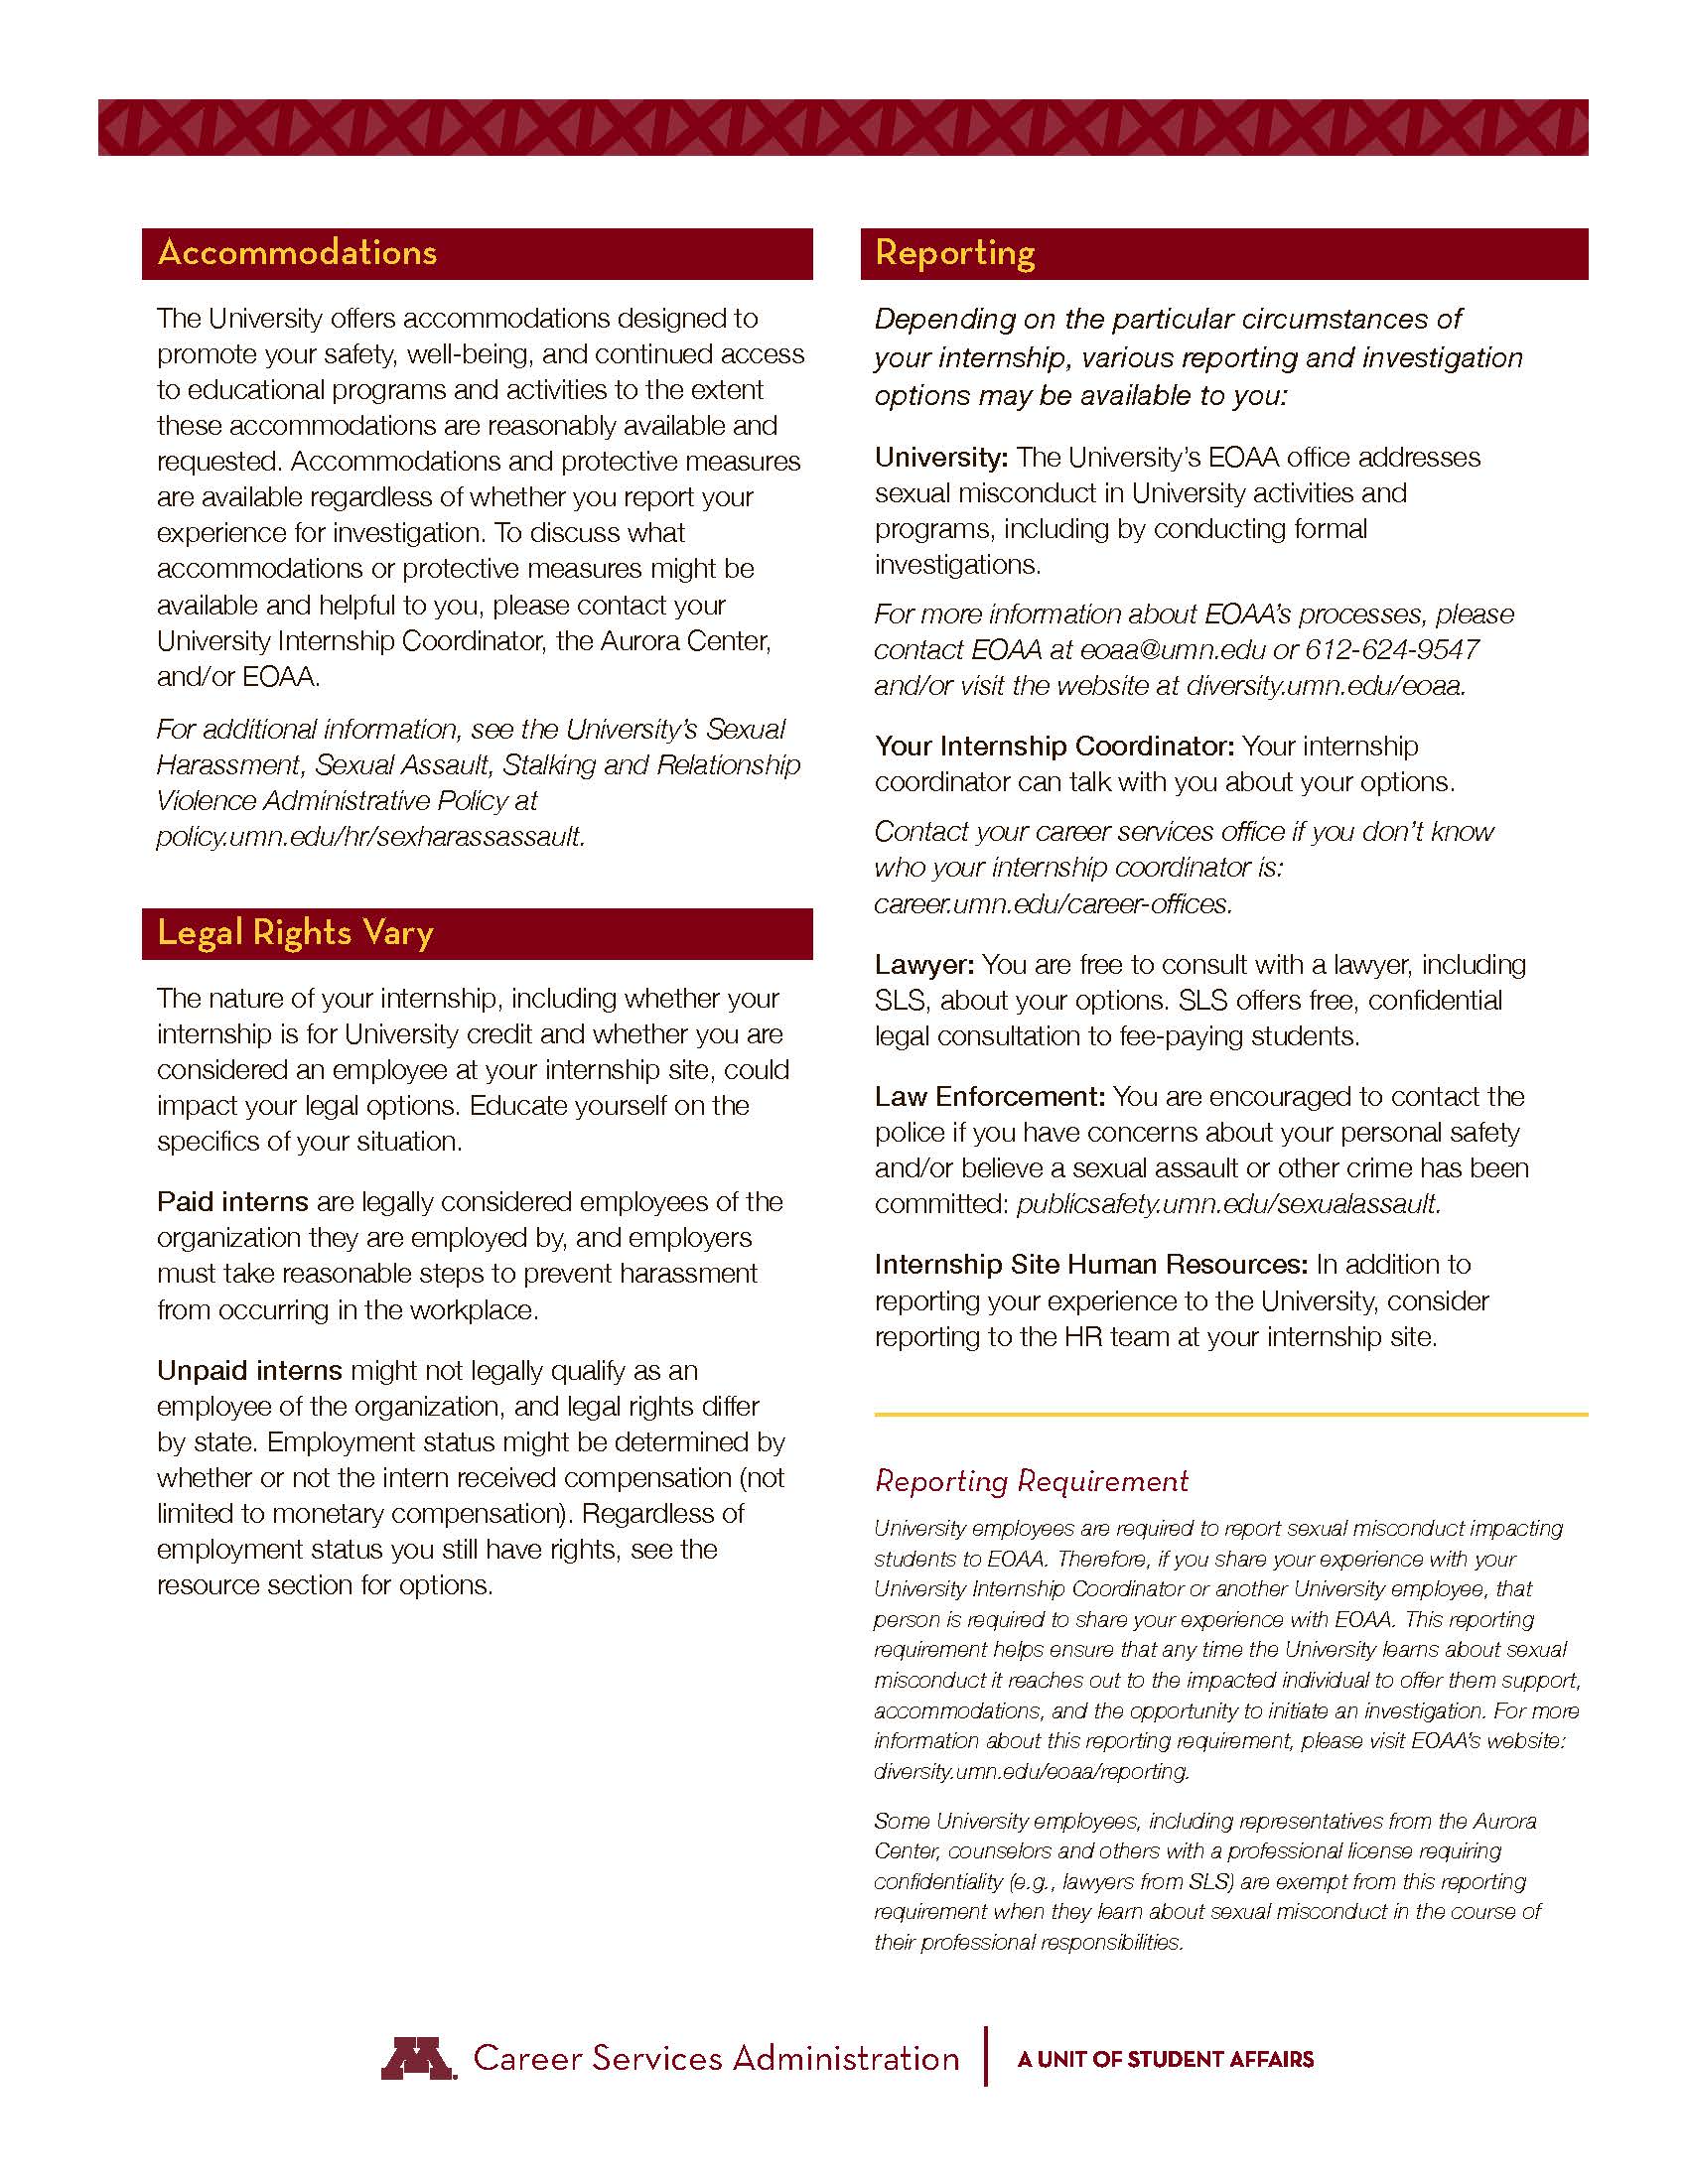 Second page of document on resources if sexual harassment occurs in an internship